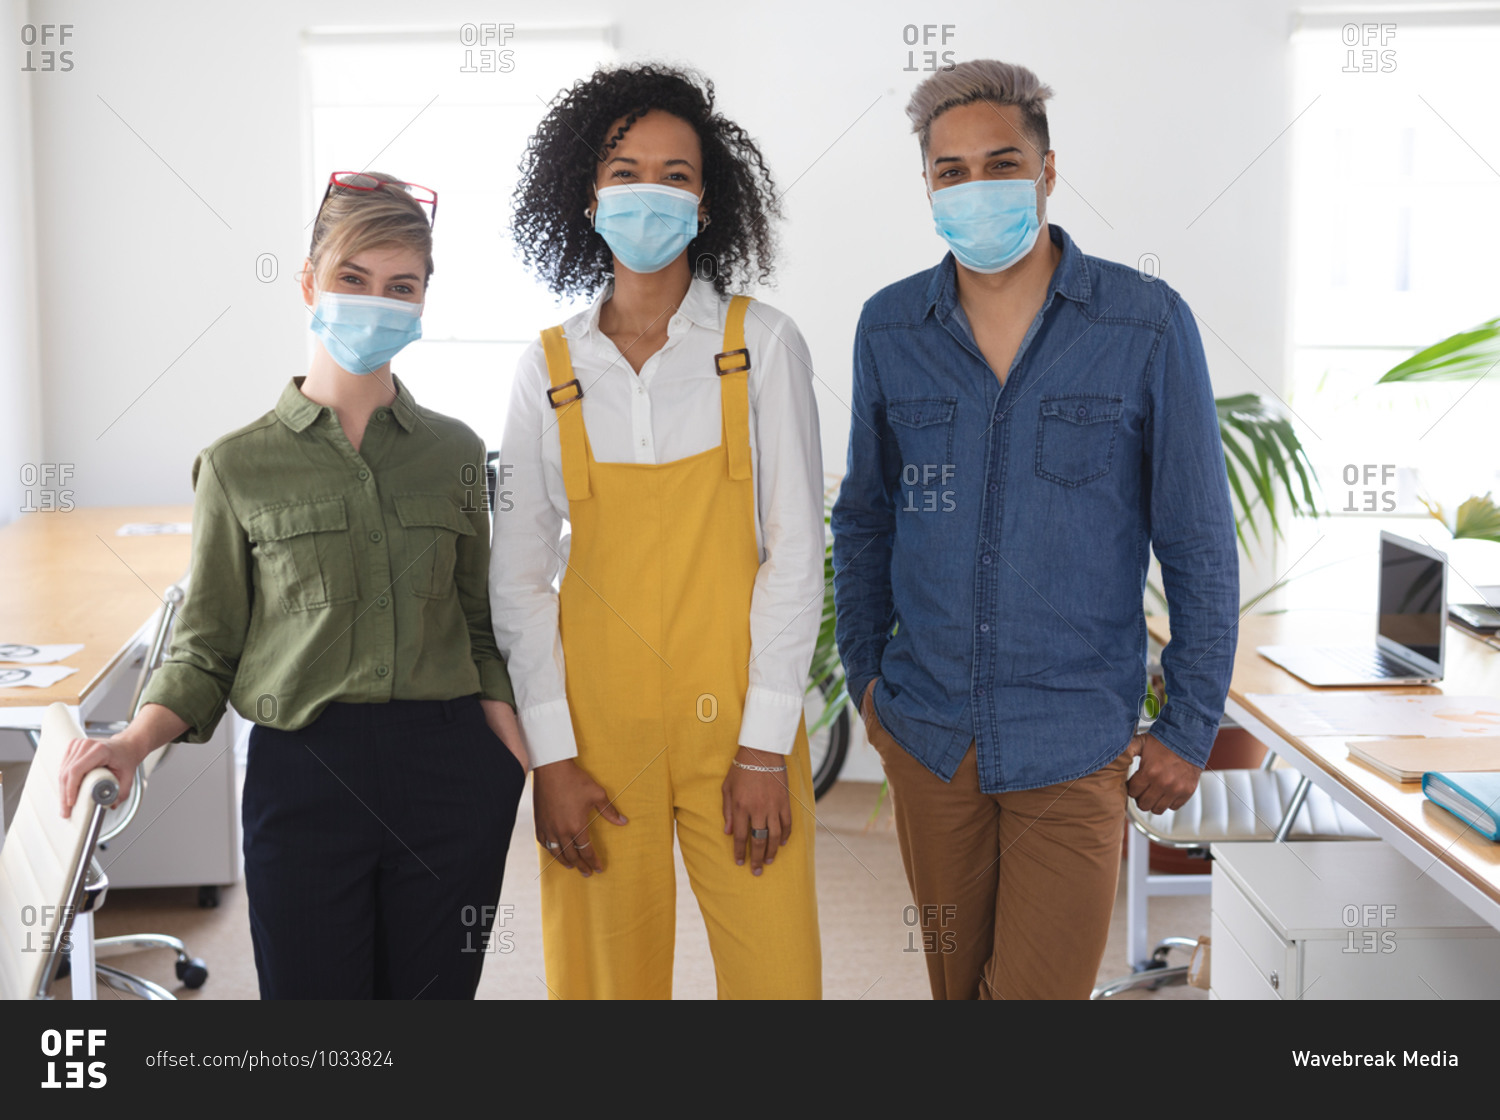 Portrait of a multi ethnic group of three male and female creatives in office wearing face masks, Health and hygiene in the workplace during Coronavirus Covid 19 pandemic.